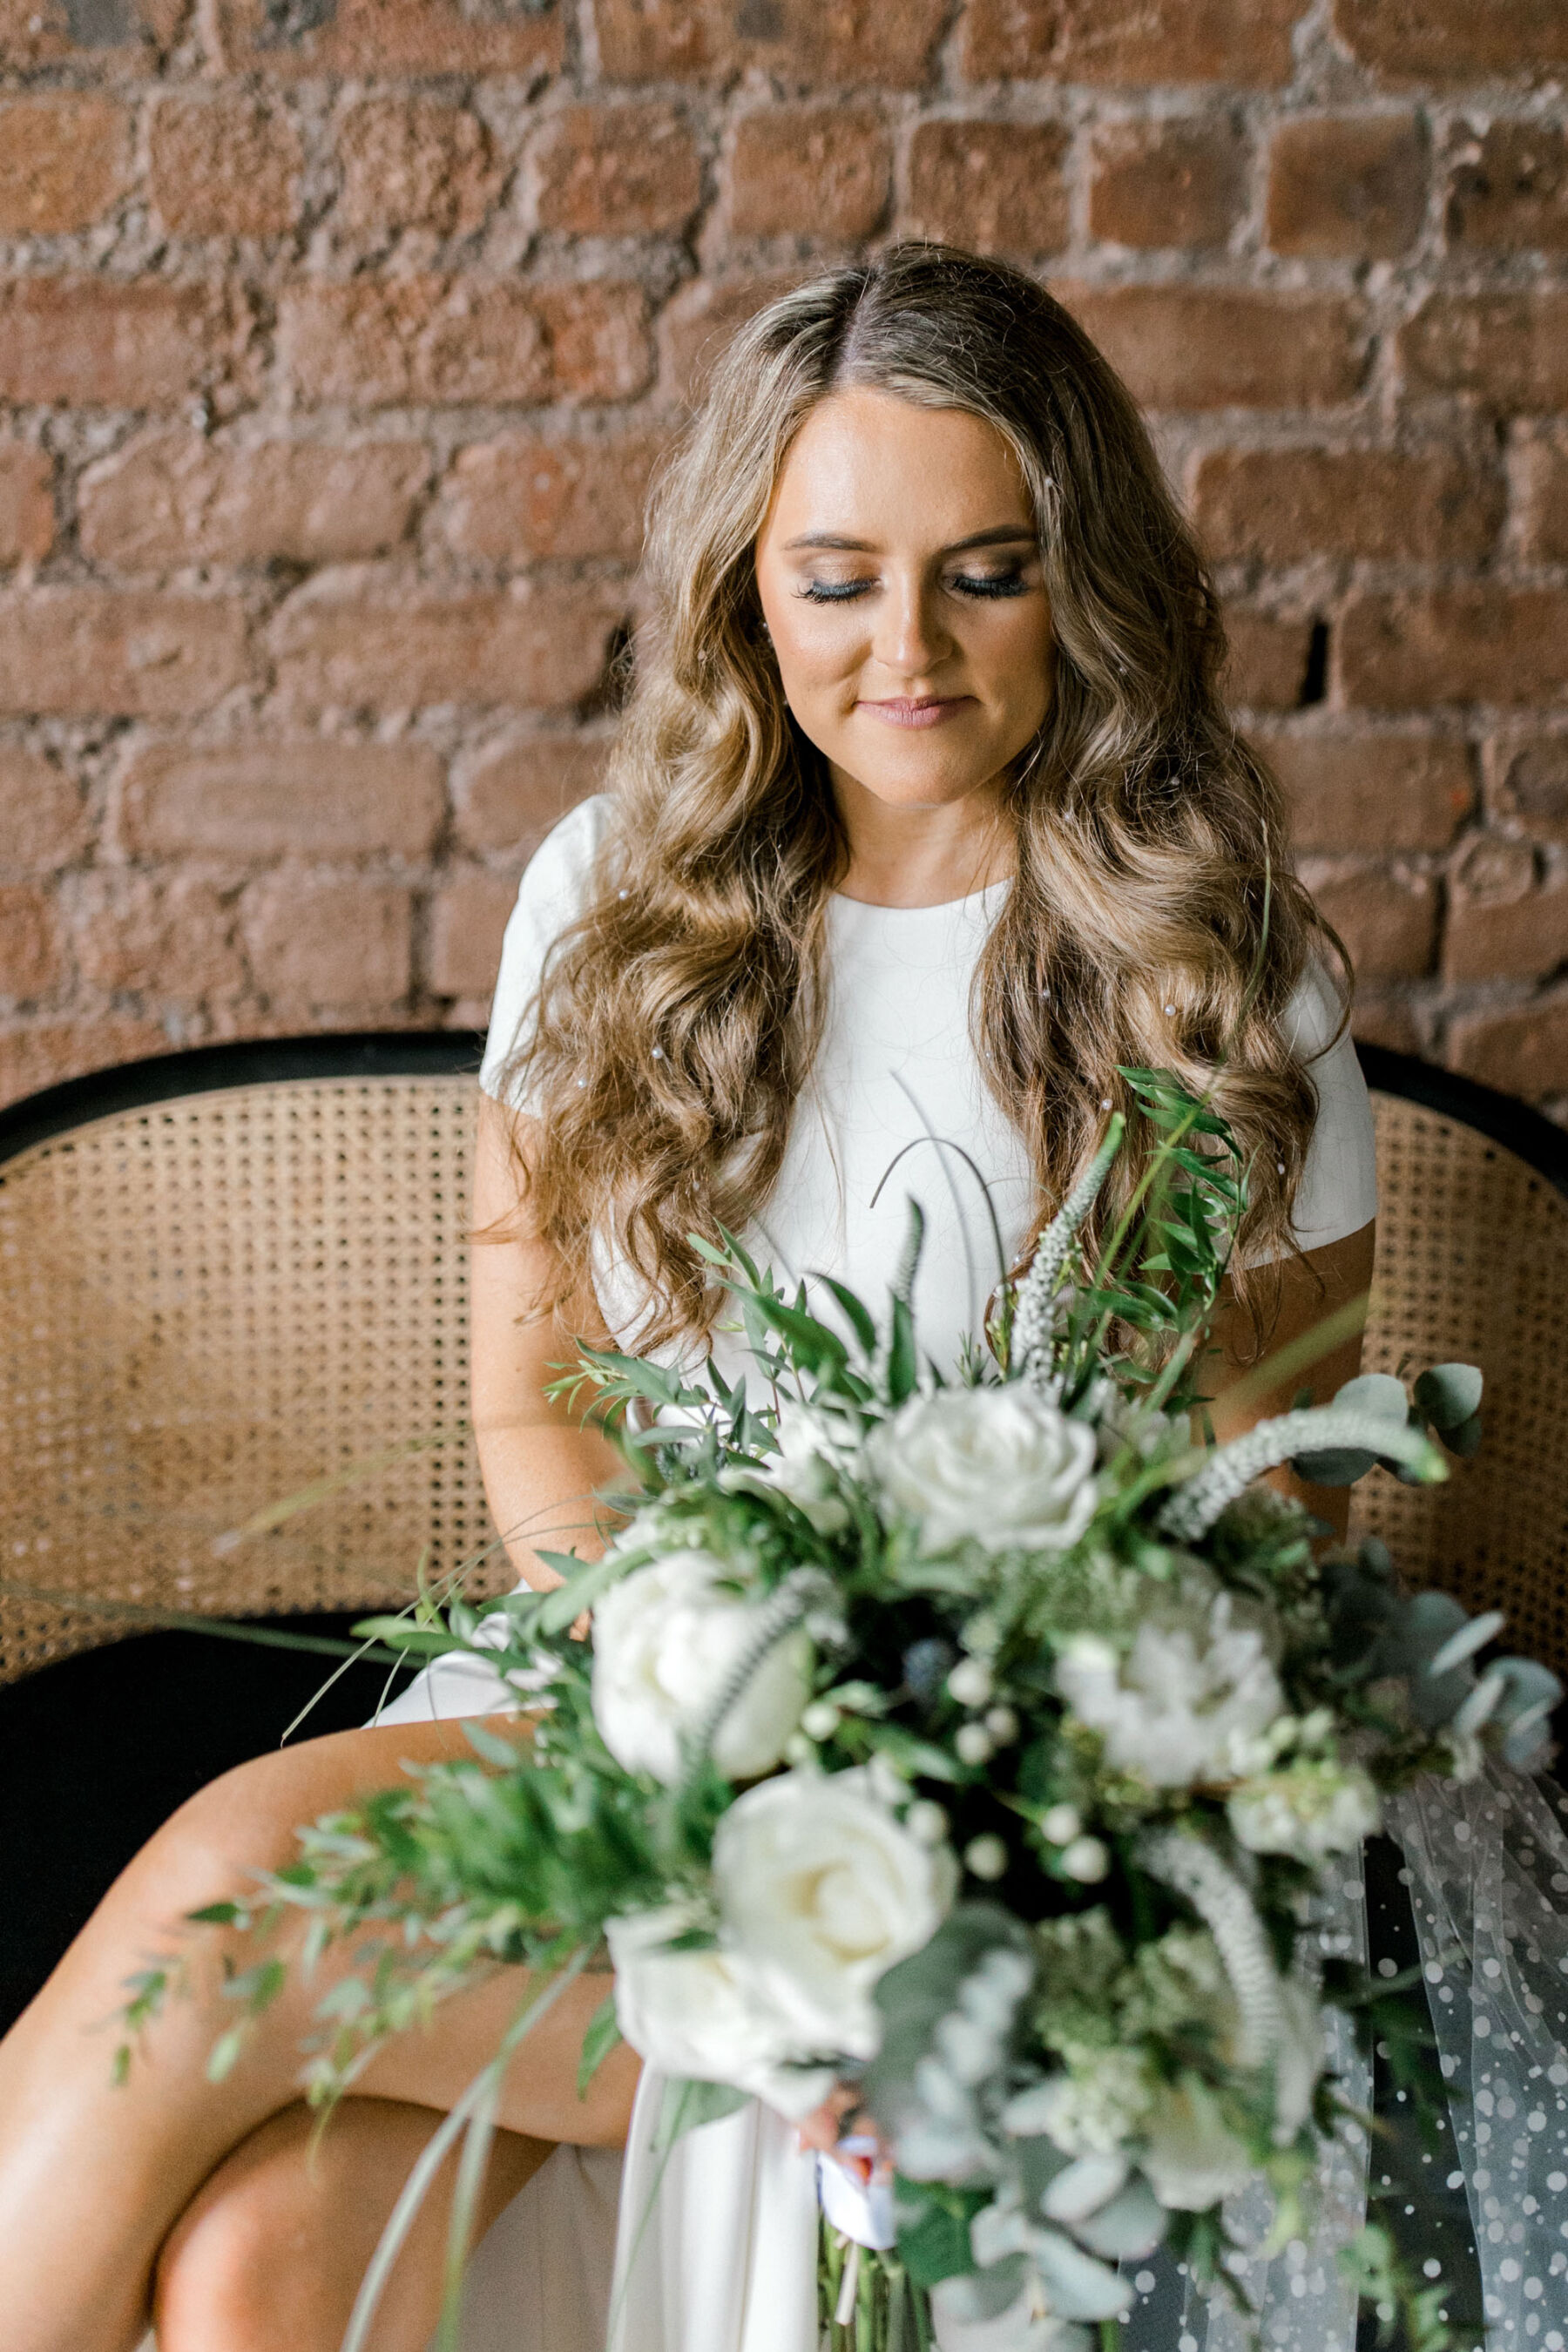 Bride with long blonde wavy hair and a large green and white bouquet